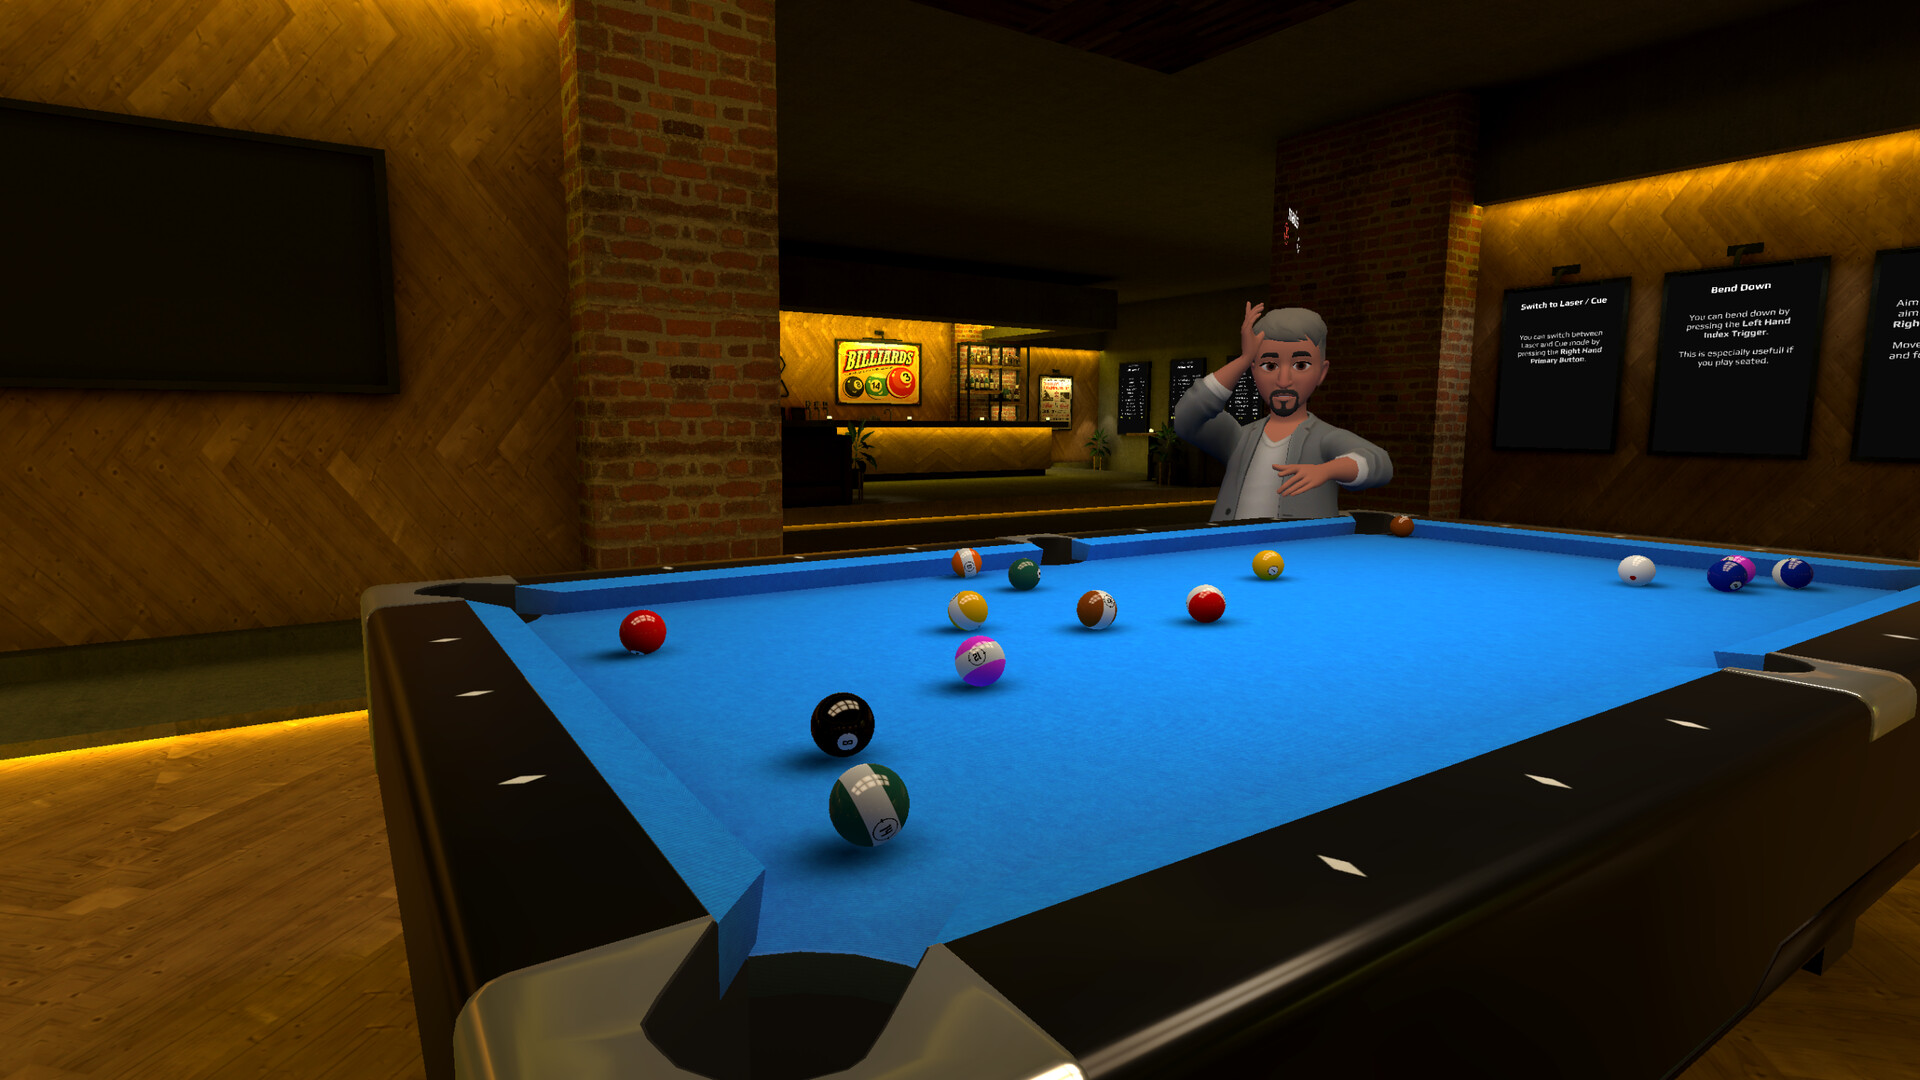 Best Social VR Pool Game for Quest 2 - Spark Ball Pool 